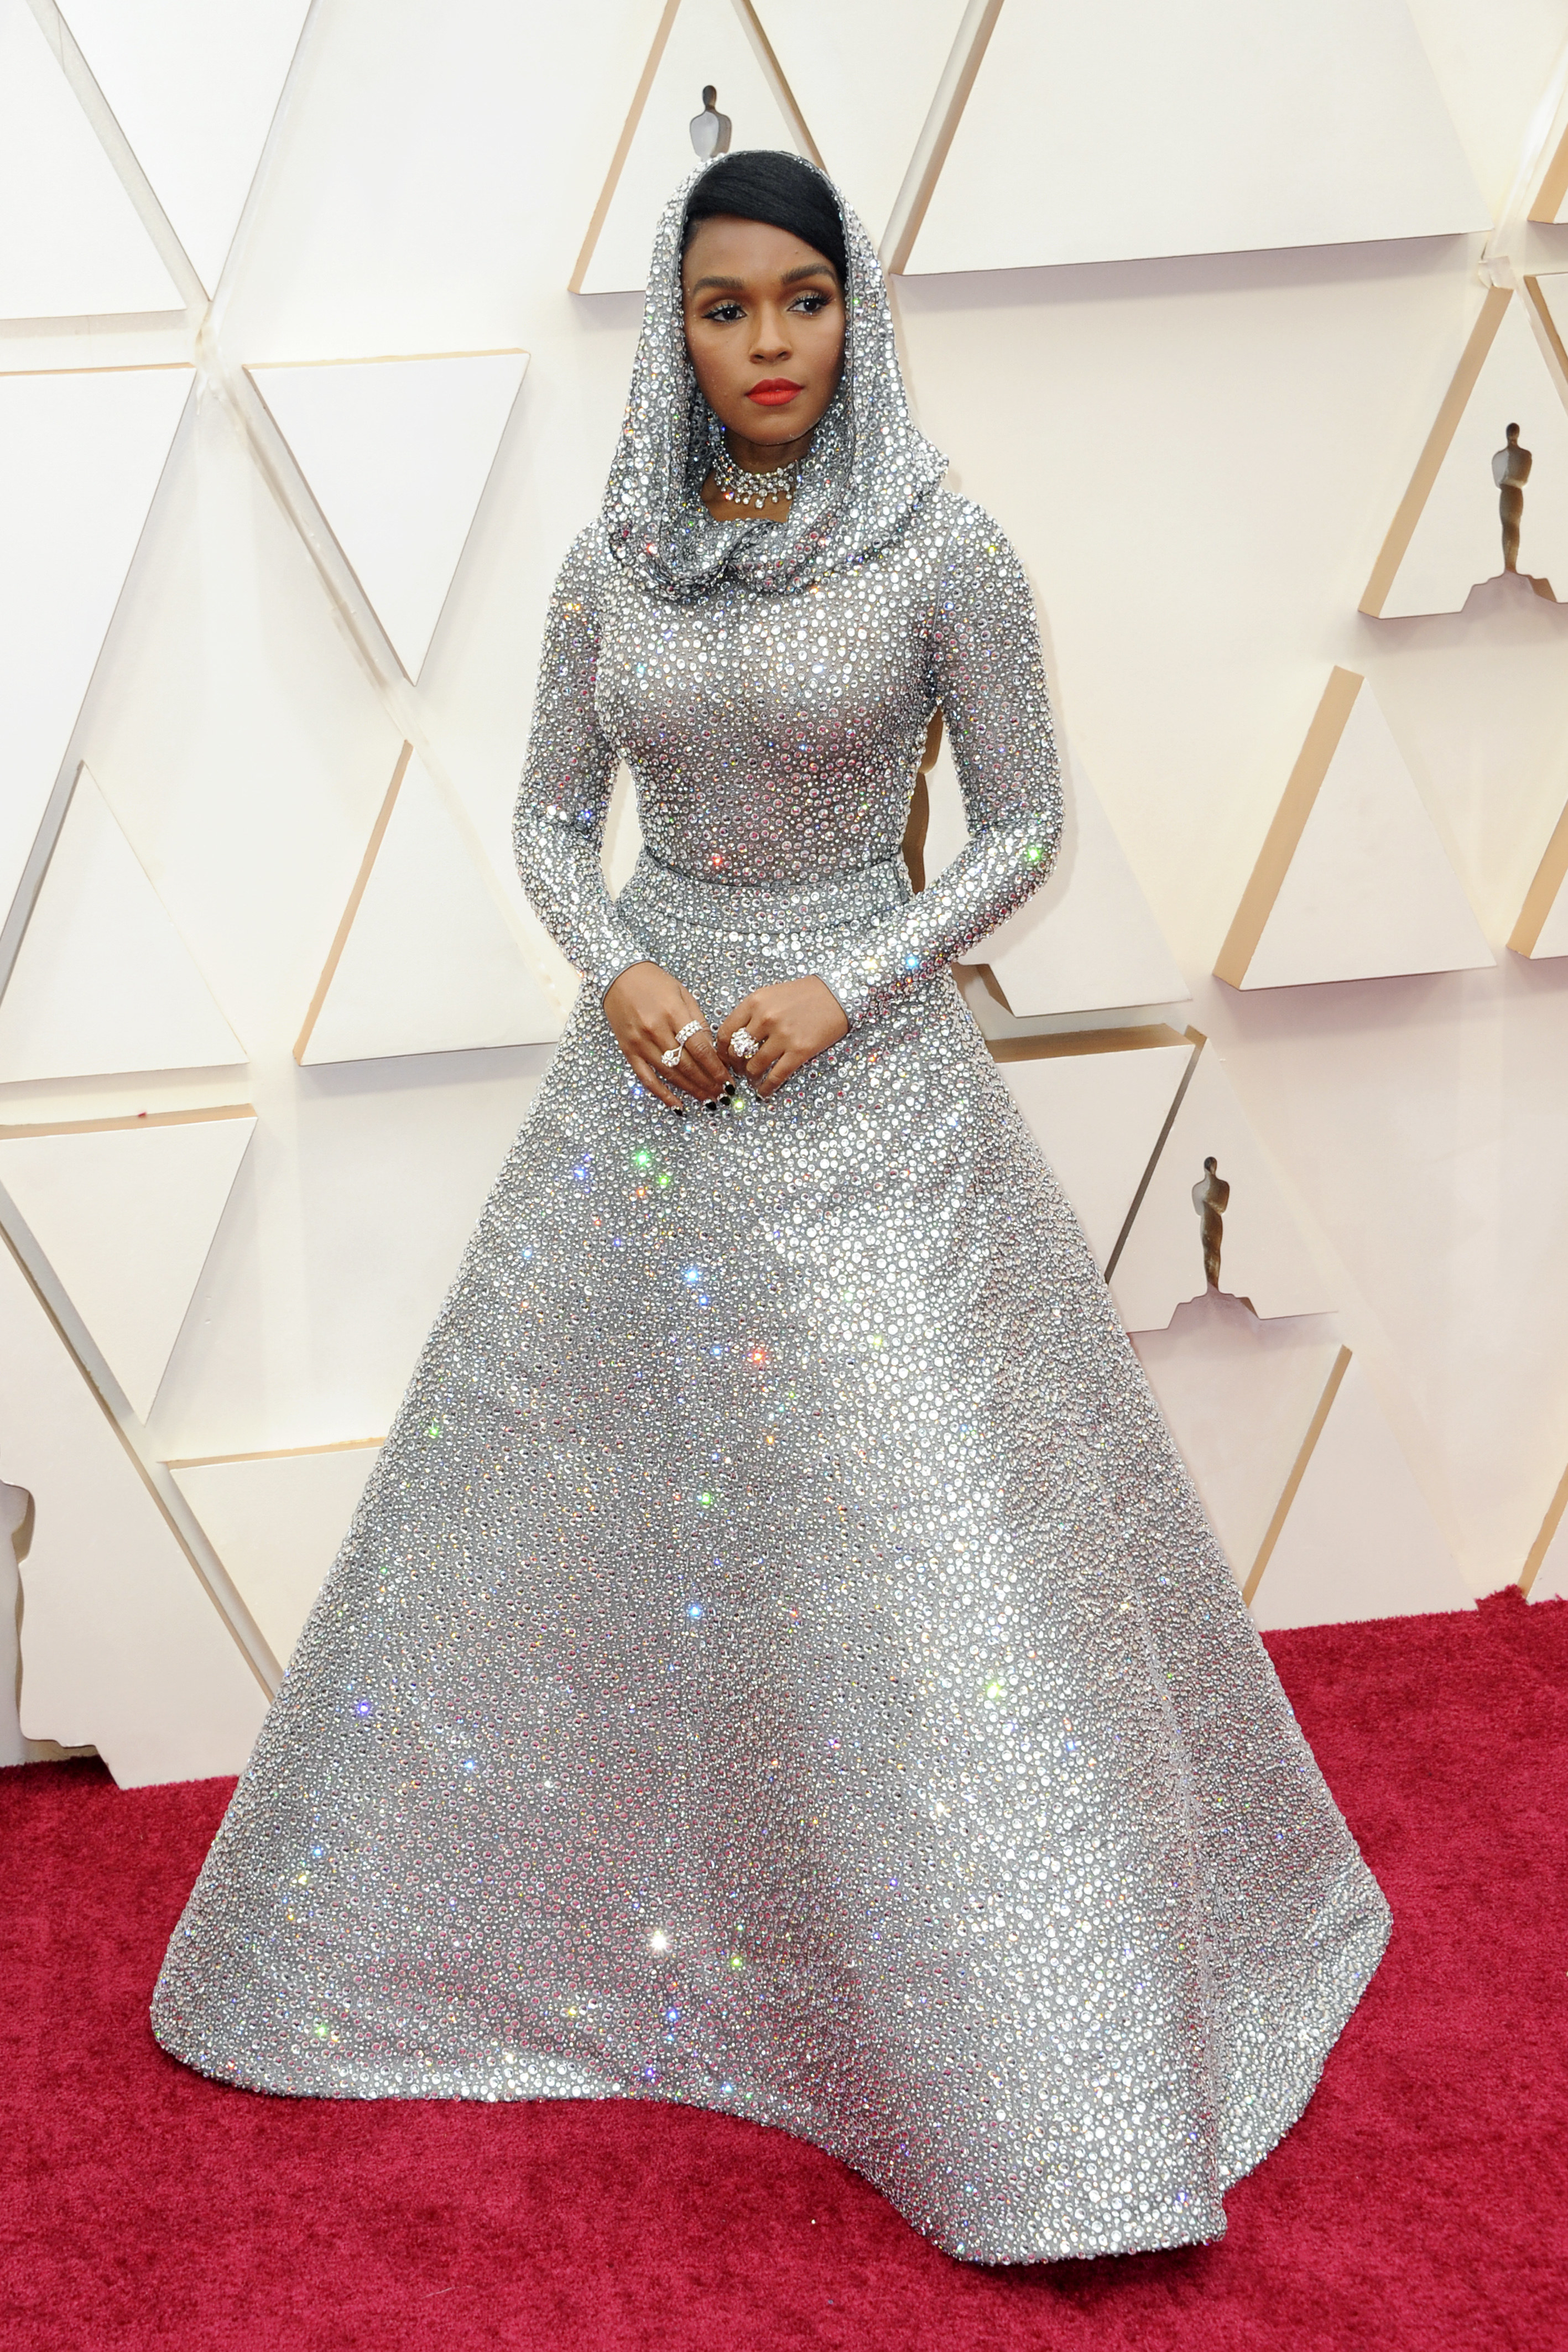 Janelle wearing a sparkling silver gown with a hood